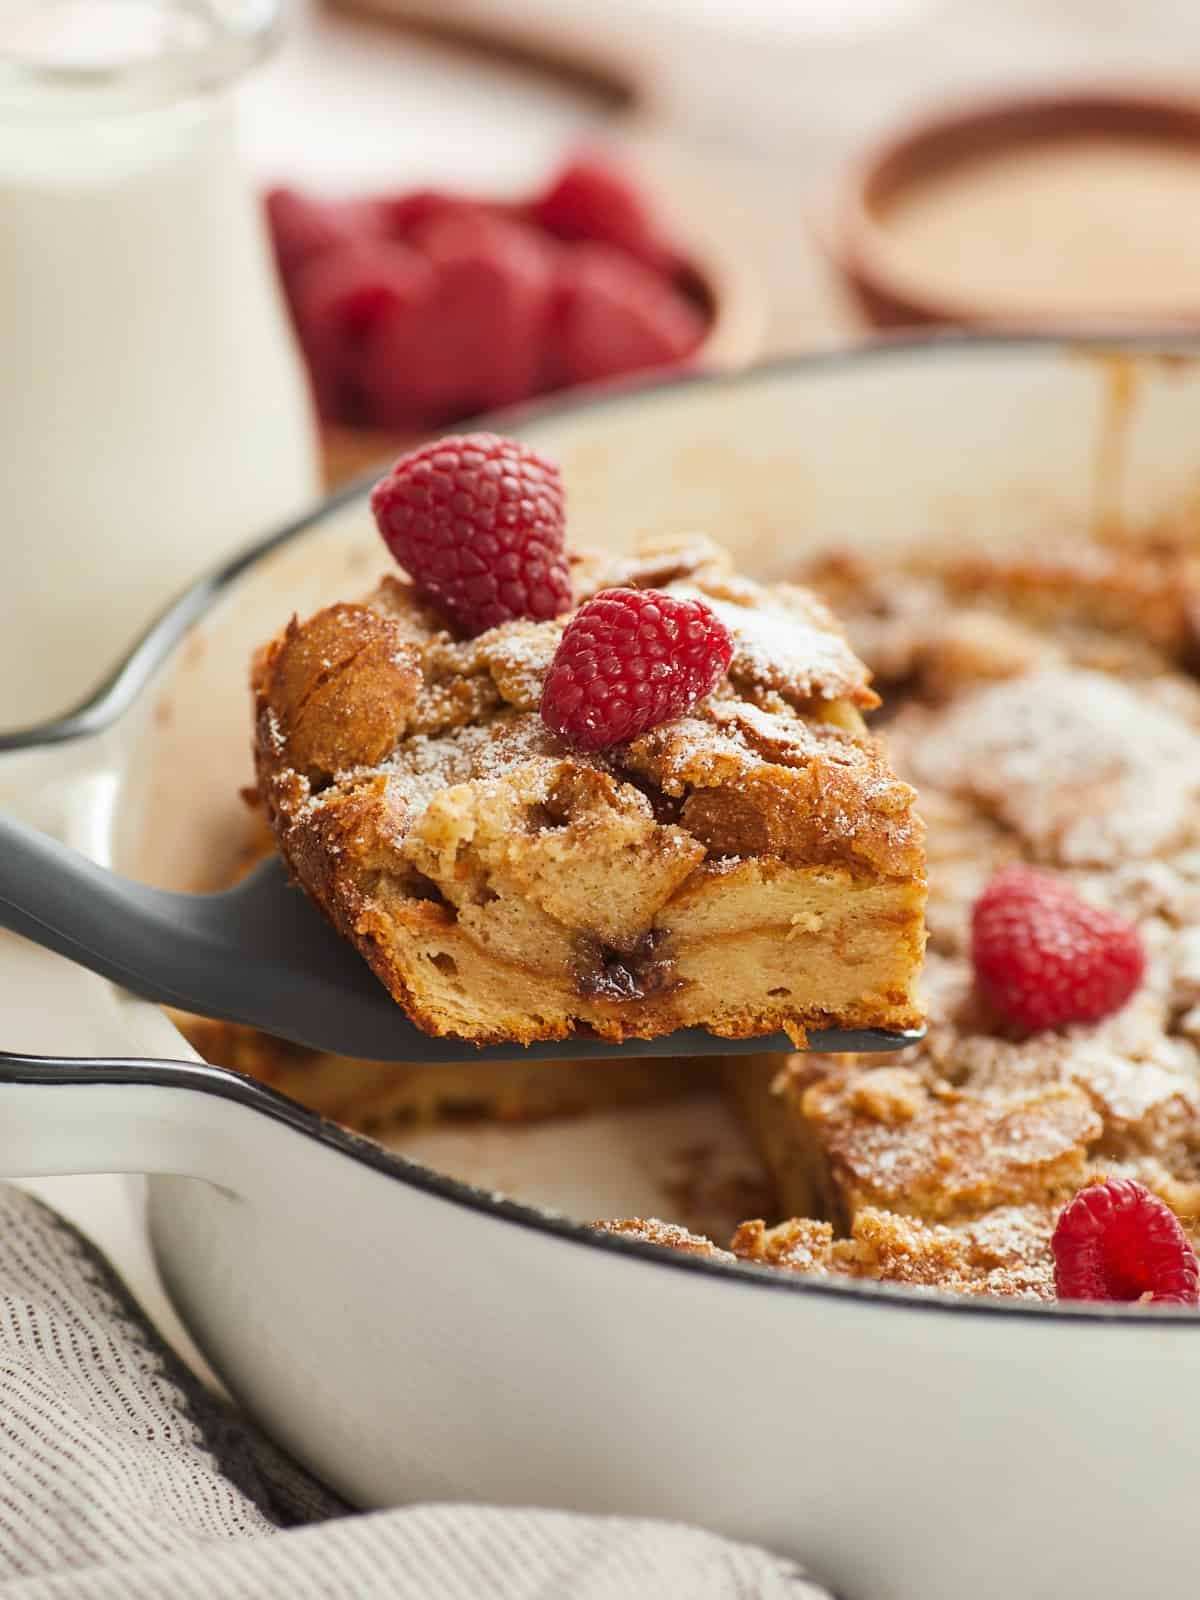 A vertical side view showing the cross section of slice of a baked bread pudding topped with powdered sugar and two raspberries as it is removed with a spatula in the left side of the frame, and blurred in the background are a small glass jar of heavy cream and wooden bowls filled with raspberries and cinnamon sugar..